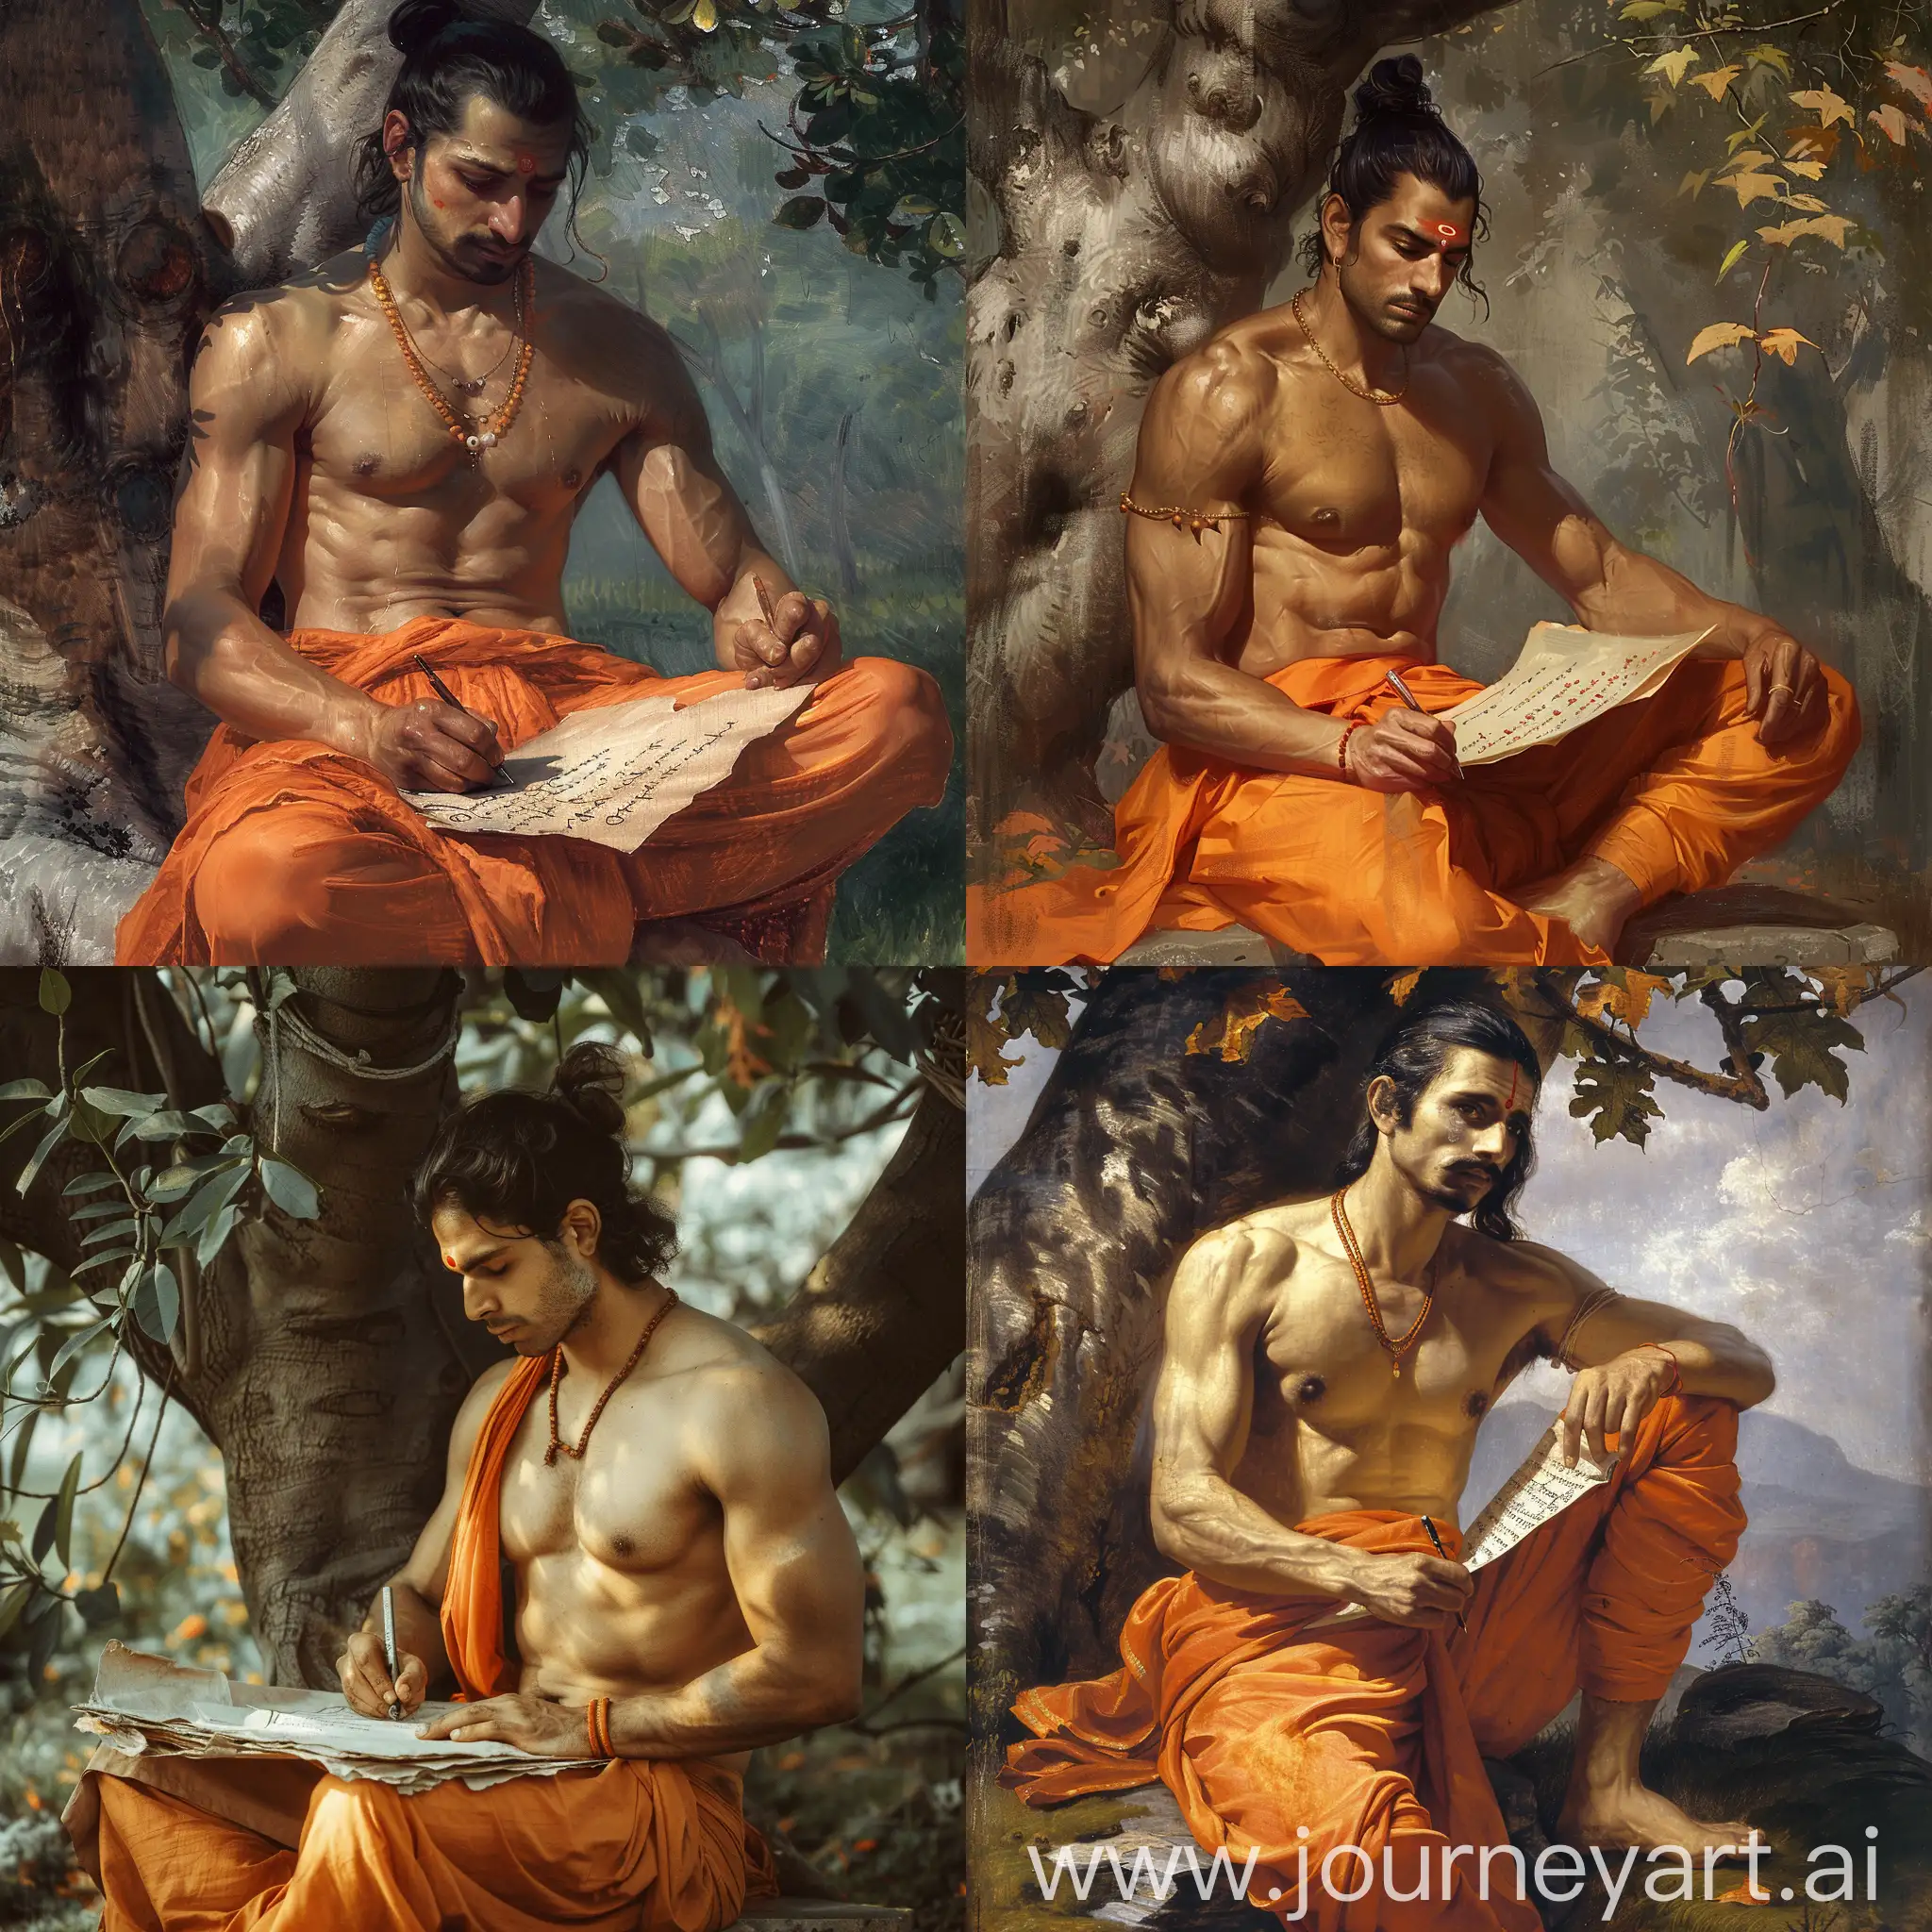 An Indian sage sitting under a tree and writing on old paper.  He is fit, athletic, wears orange yoga style pants, his chest is bare but has a loose cloth in orange covering one side of it.  He sports a half hair bun and the rest of the hair flows down to his shoulder